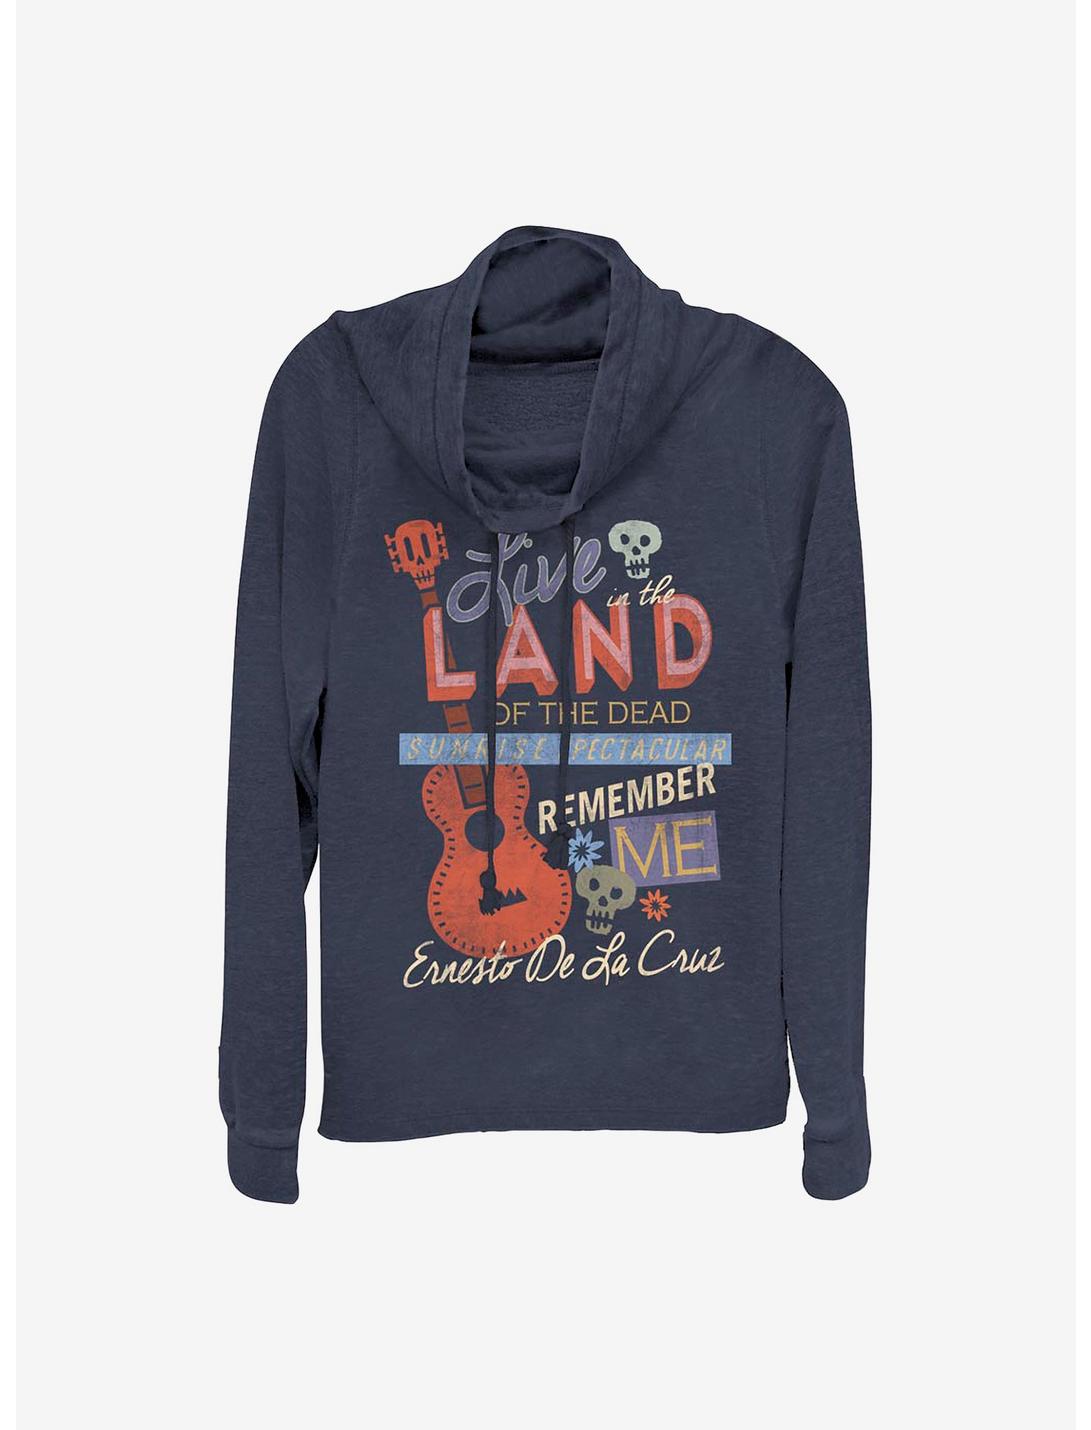 Disney Pixar Coco Live In The Land Of The Dead Cowlneck Long-Sleeve Girls Top, NAVY, hi-res